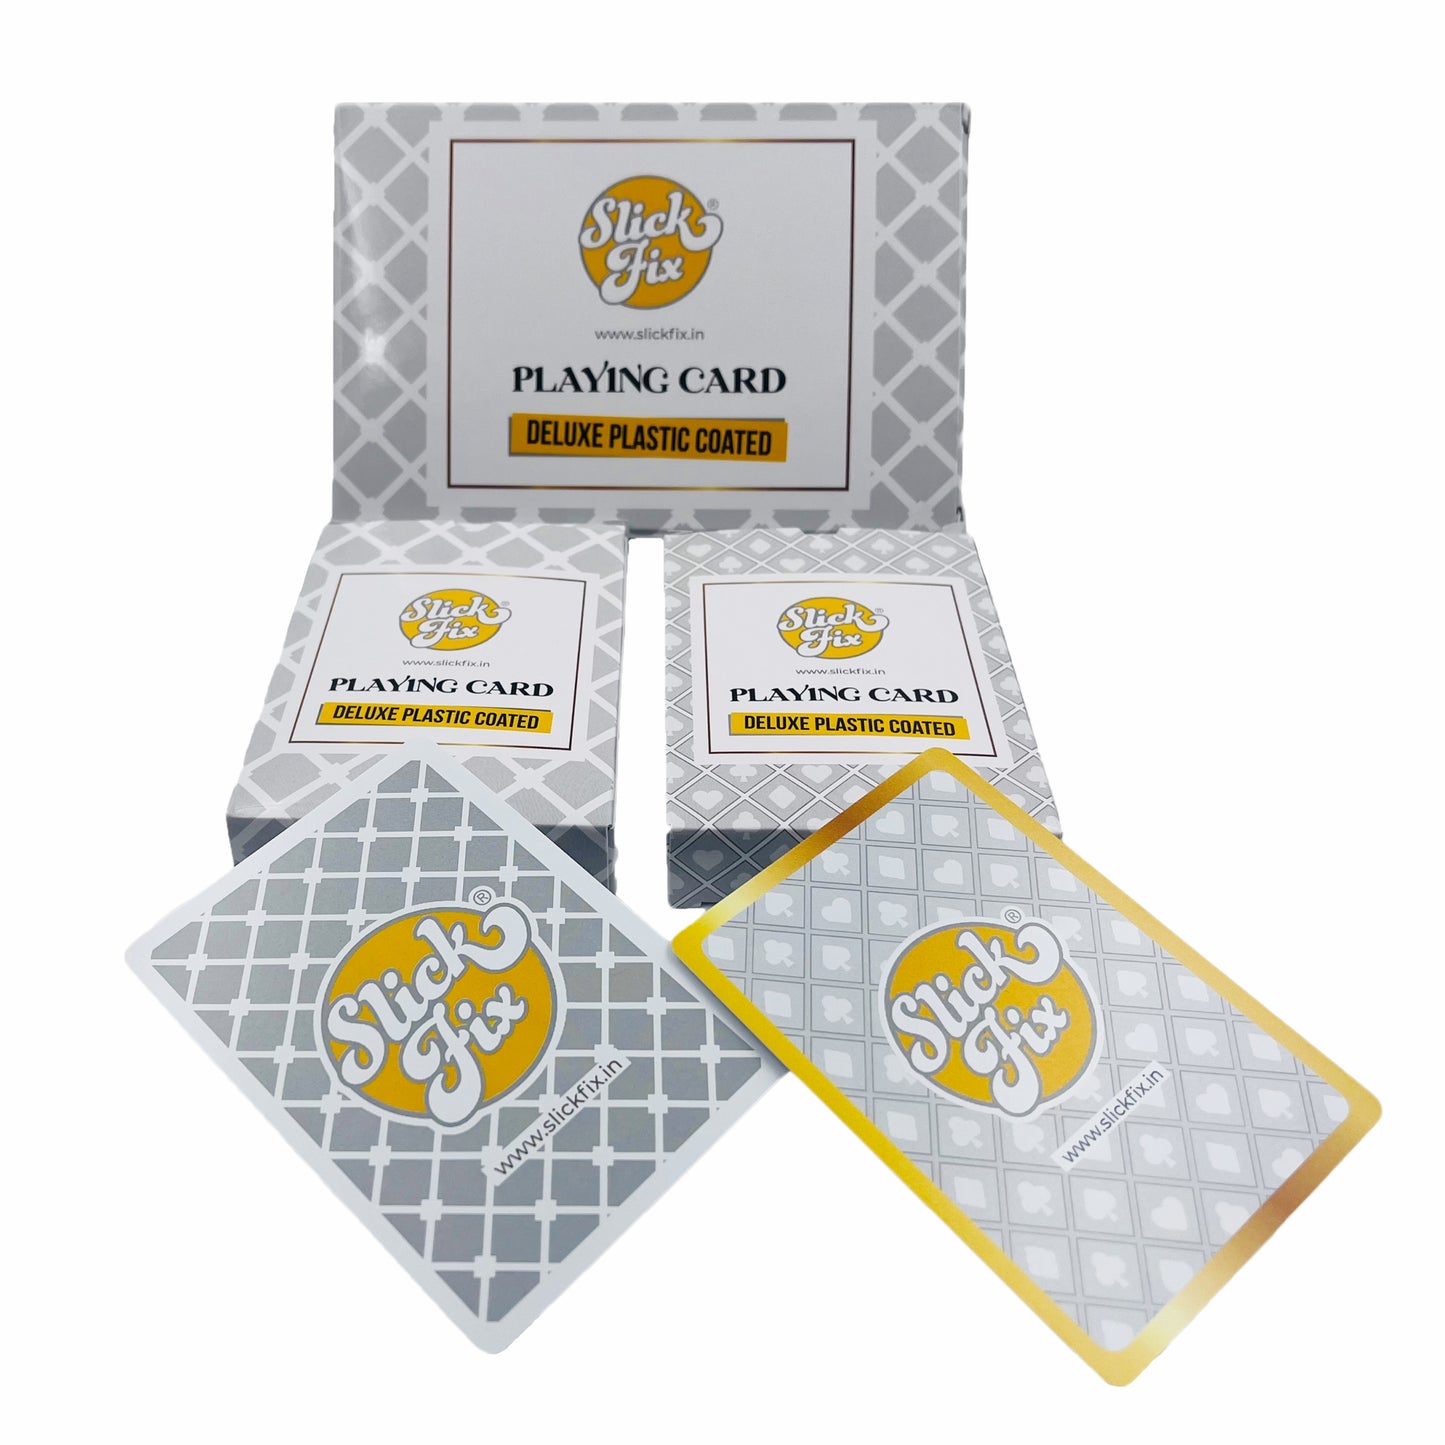 SlickFix Premium Playing Cards -( Pack of 2)